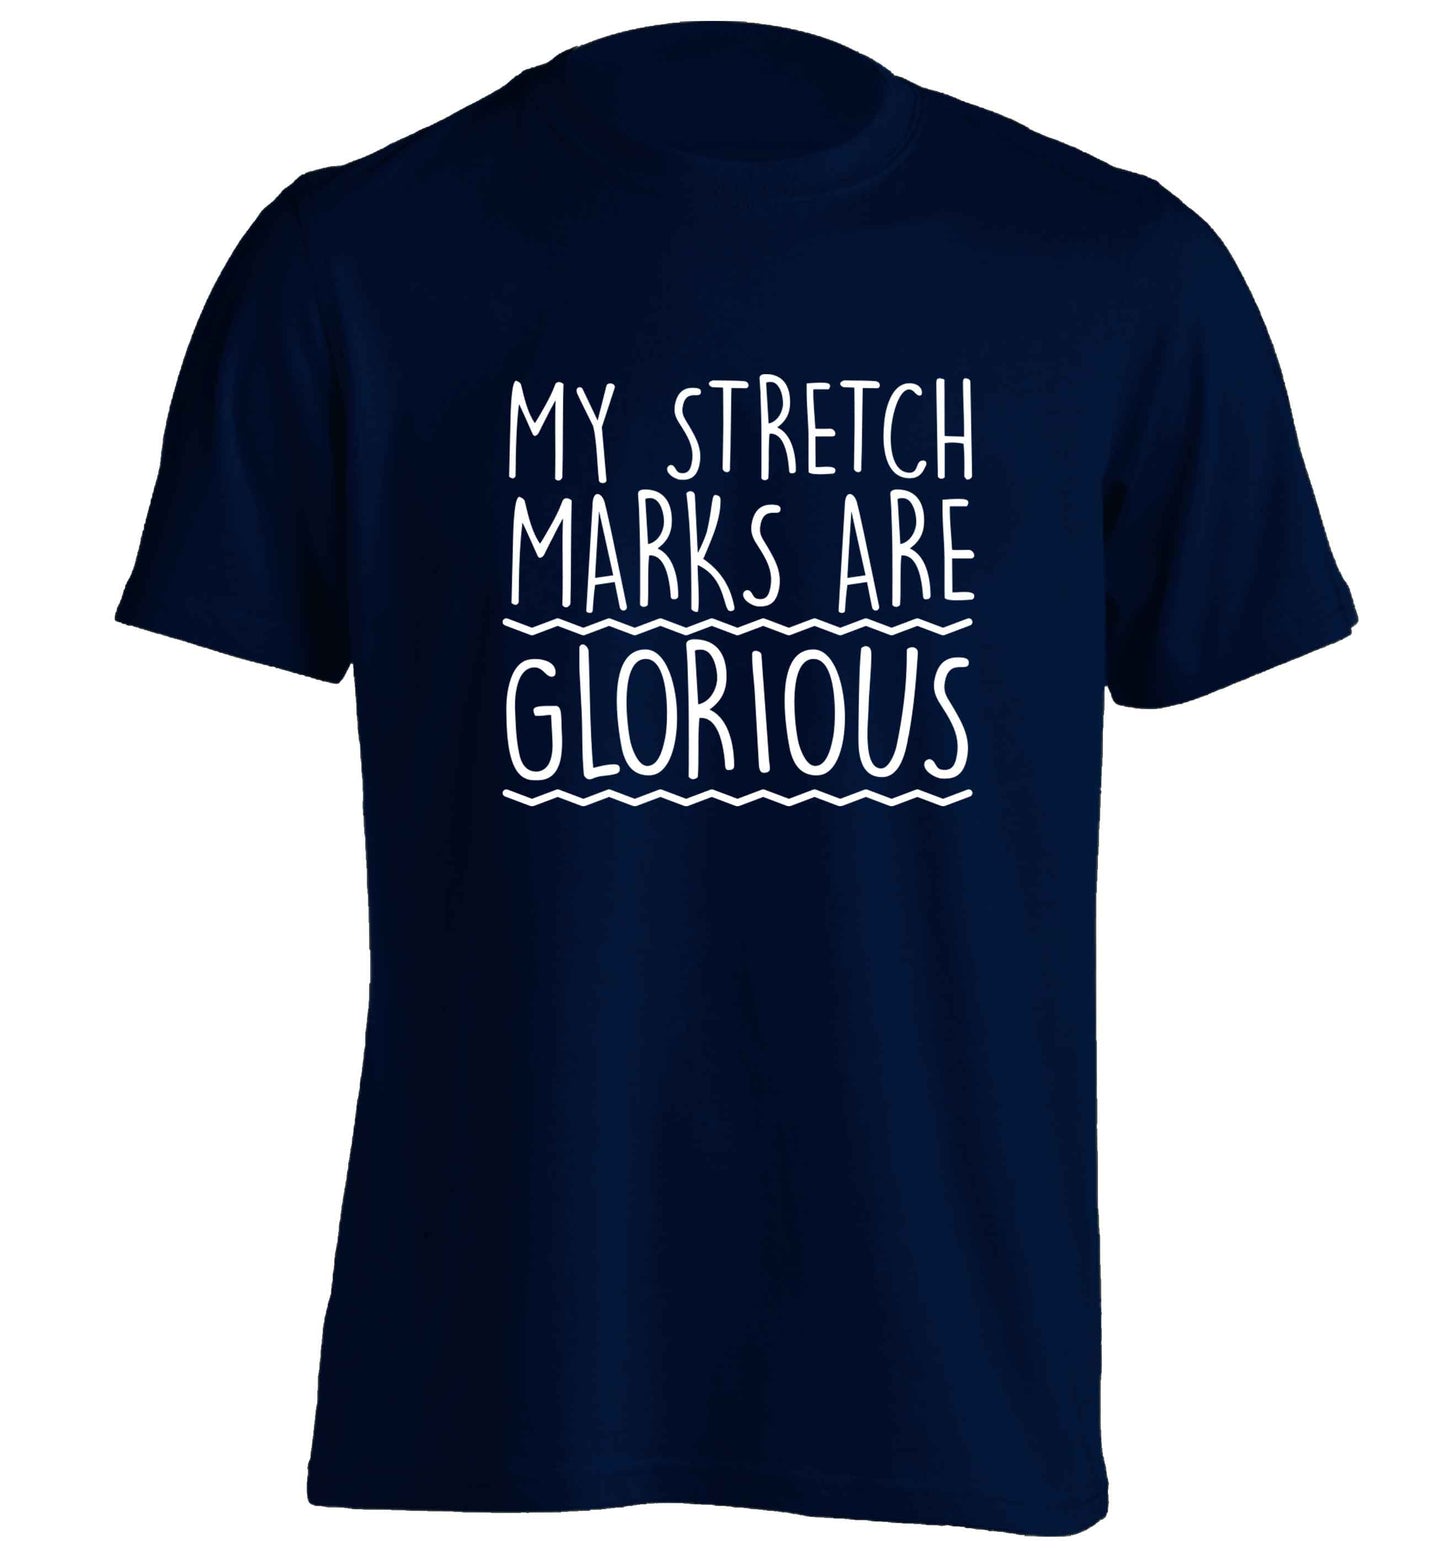 My stretch marks are glorious adults unisex navy Tshirt 2XL